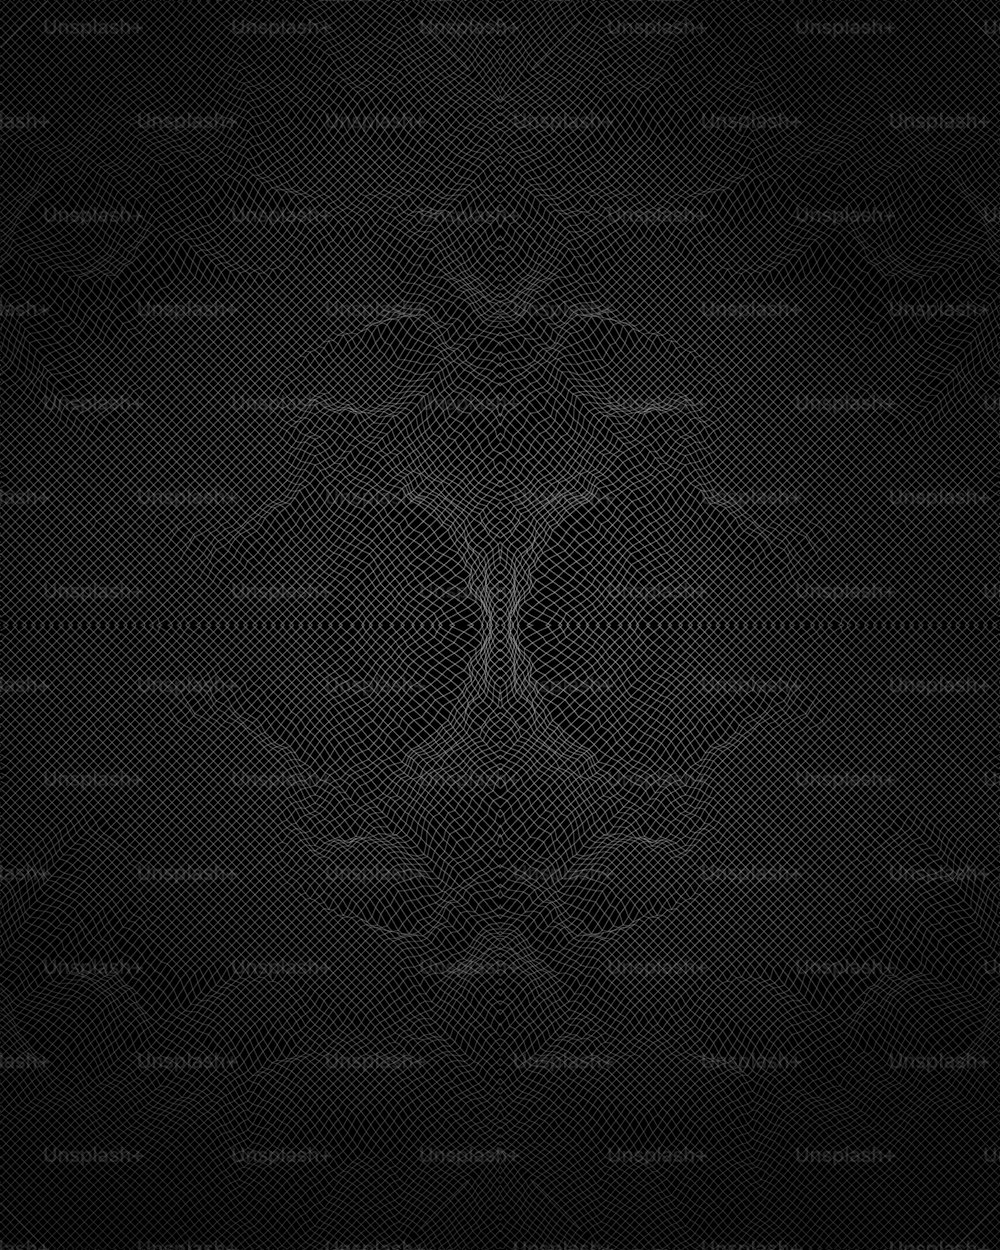 a black background with a pattern in the middle